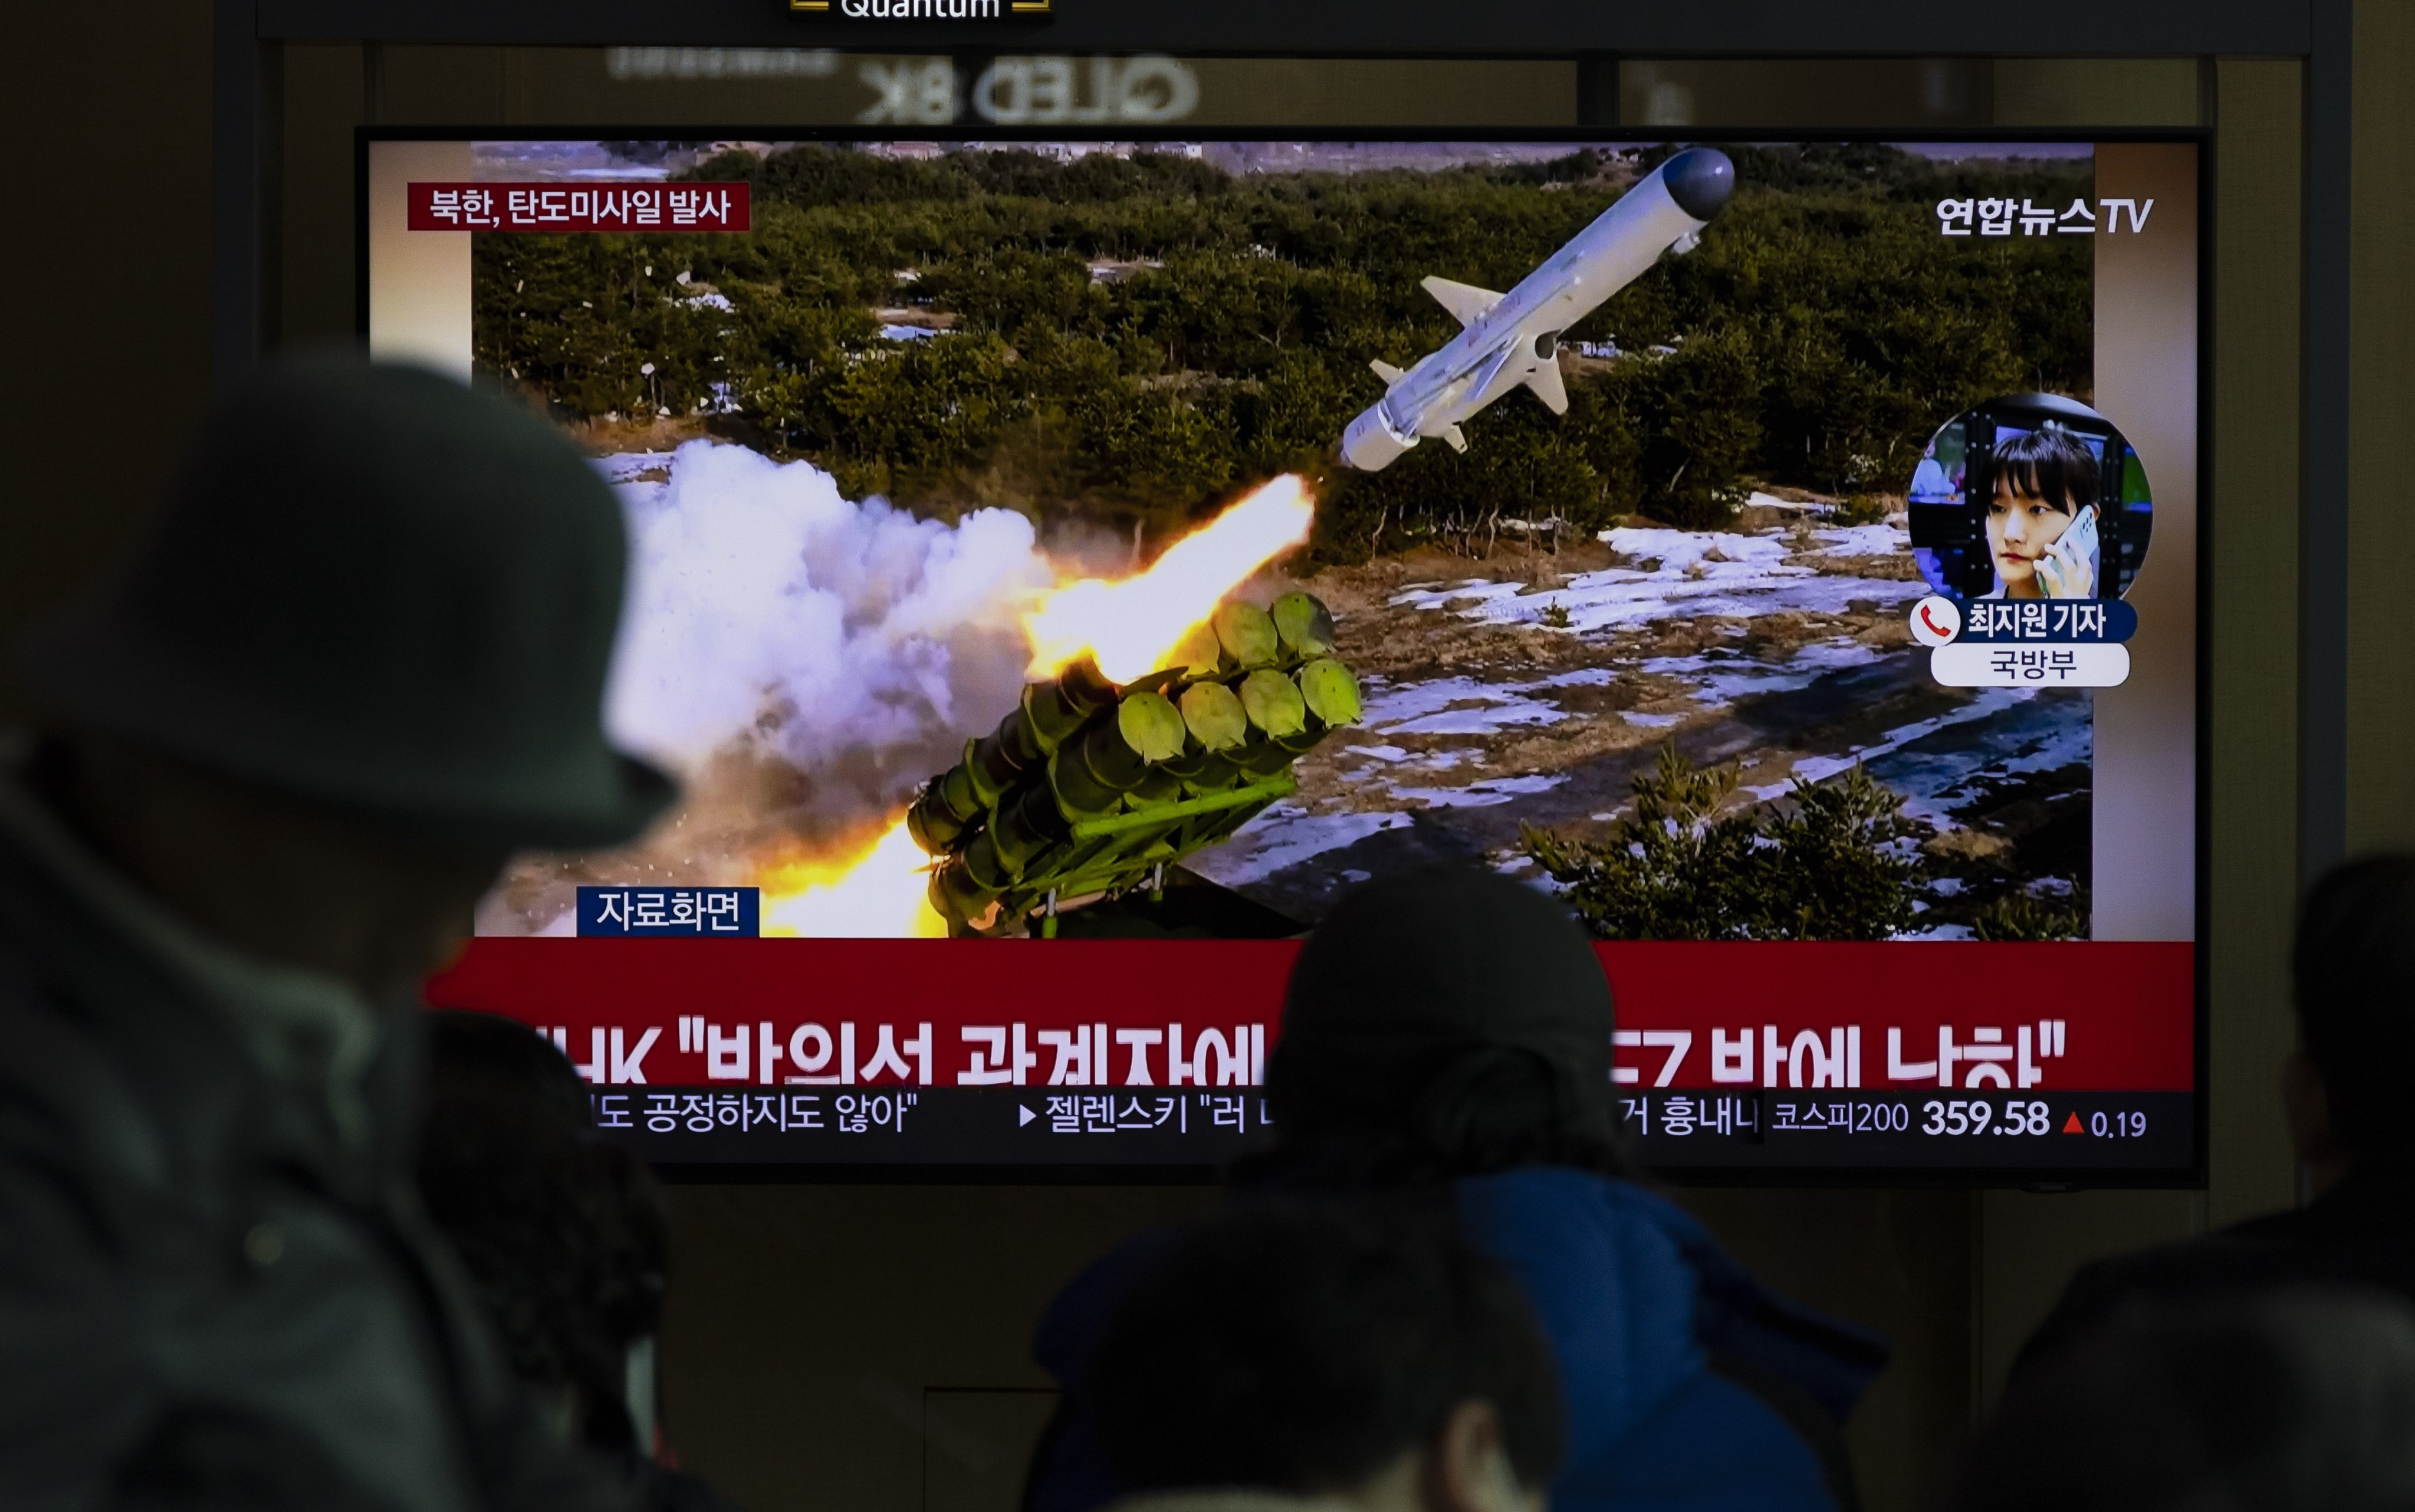 Commuters at a railway station in Seoul watch a broadcast about Monday’s missile launch by North Korea. Photo: EPA-EFE